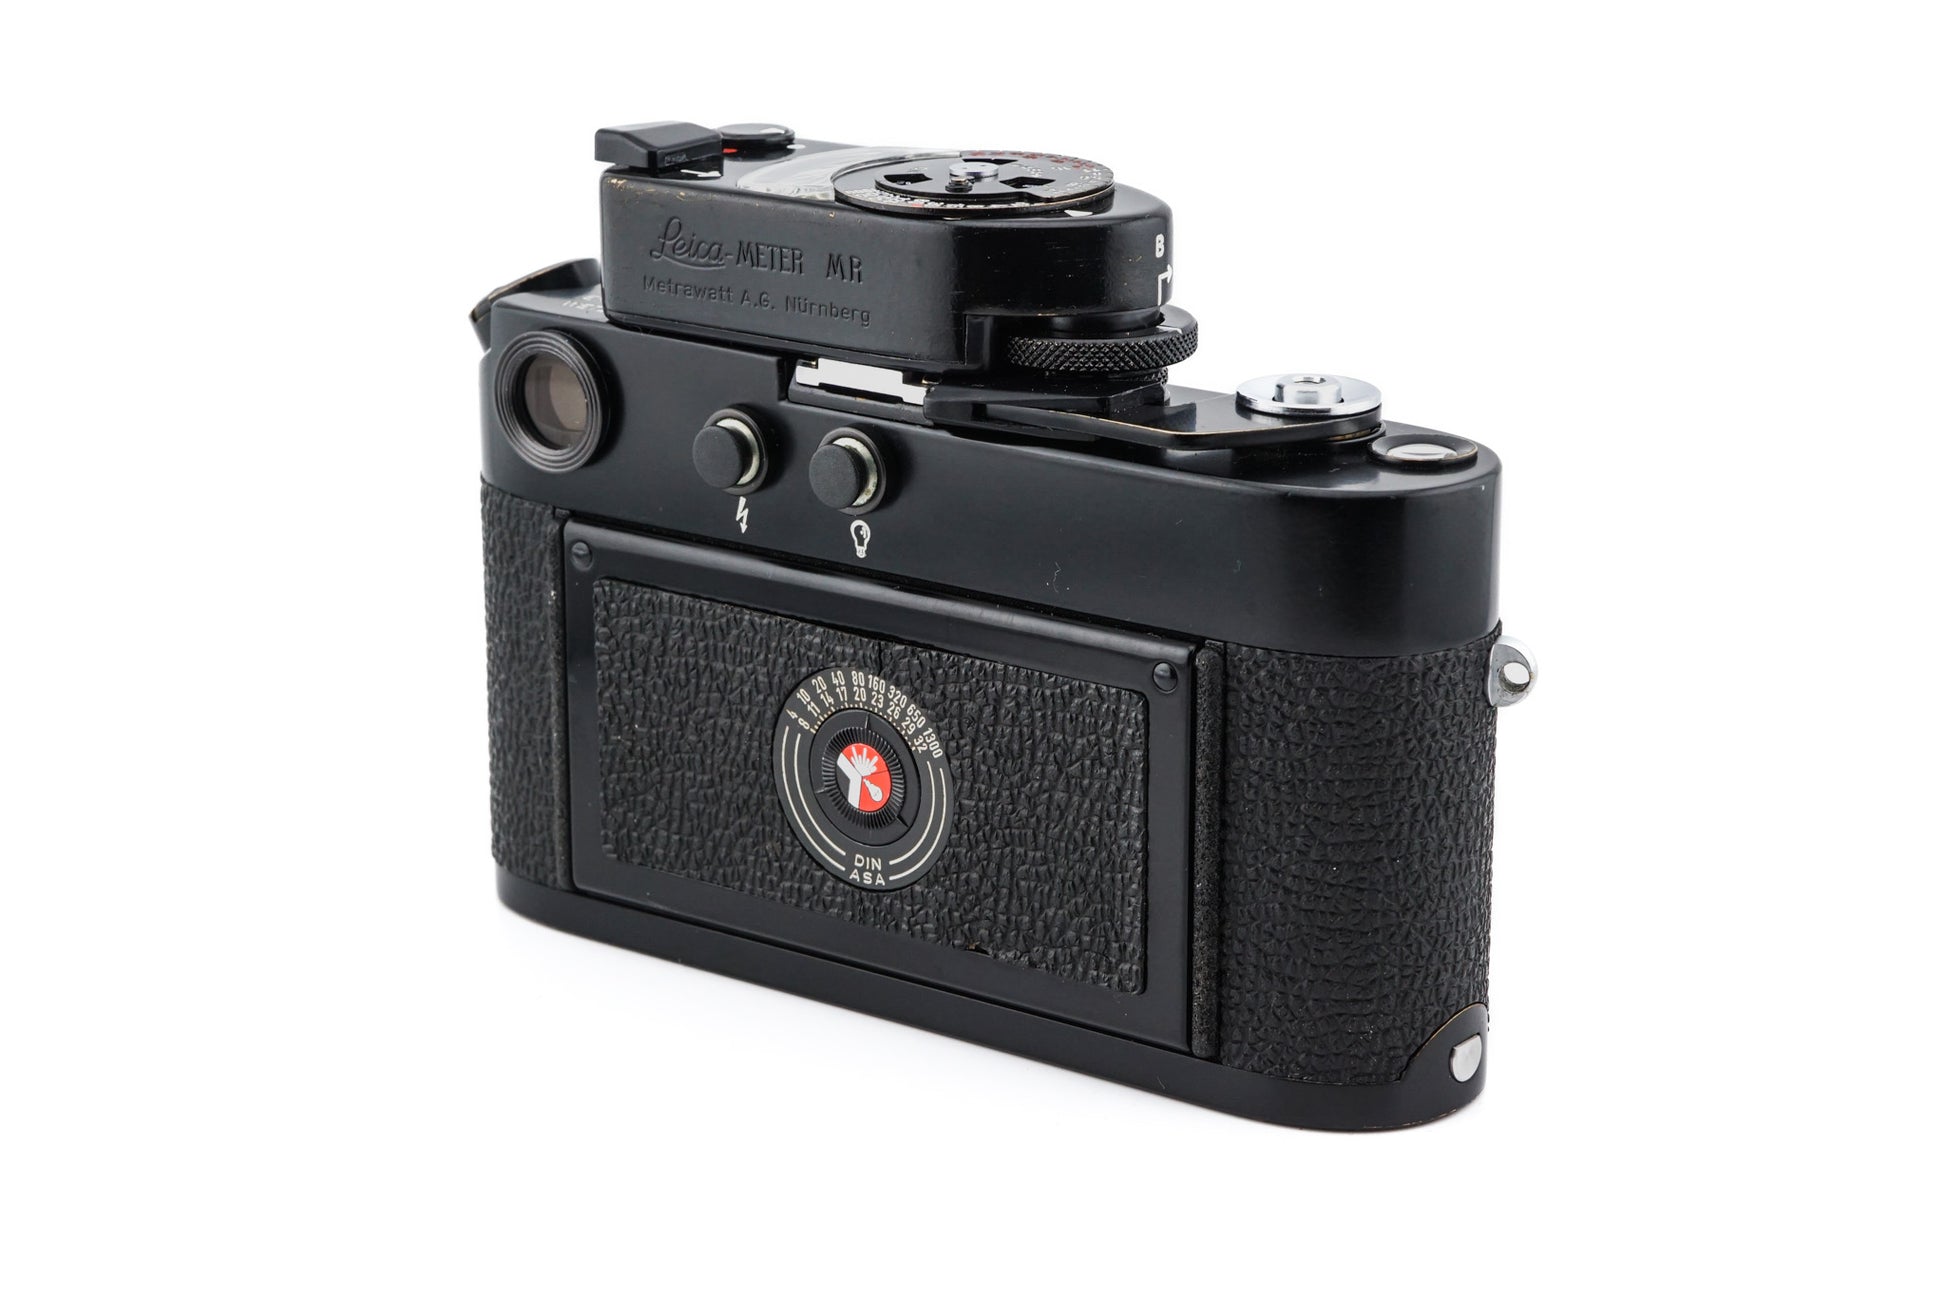 back view of original Leica M4 black paint showing black paint iso reminder dial showing range of 4 to 1300